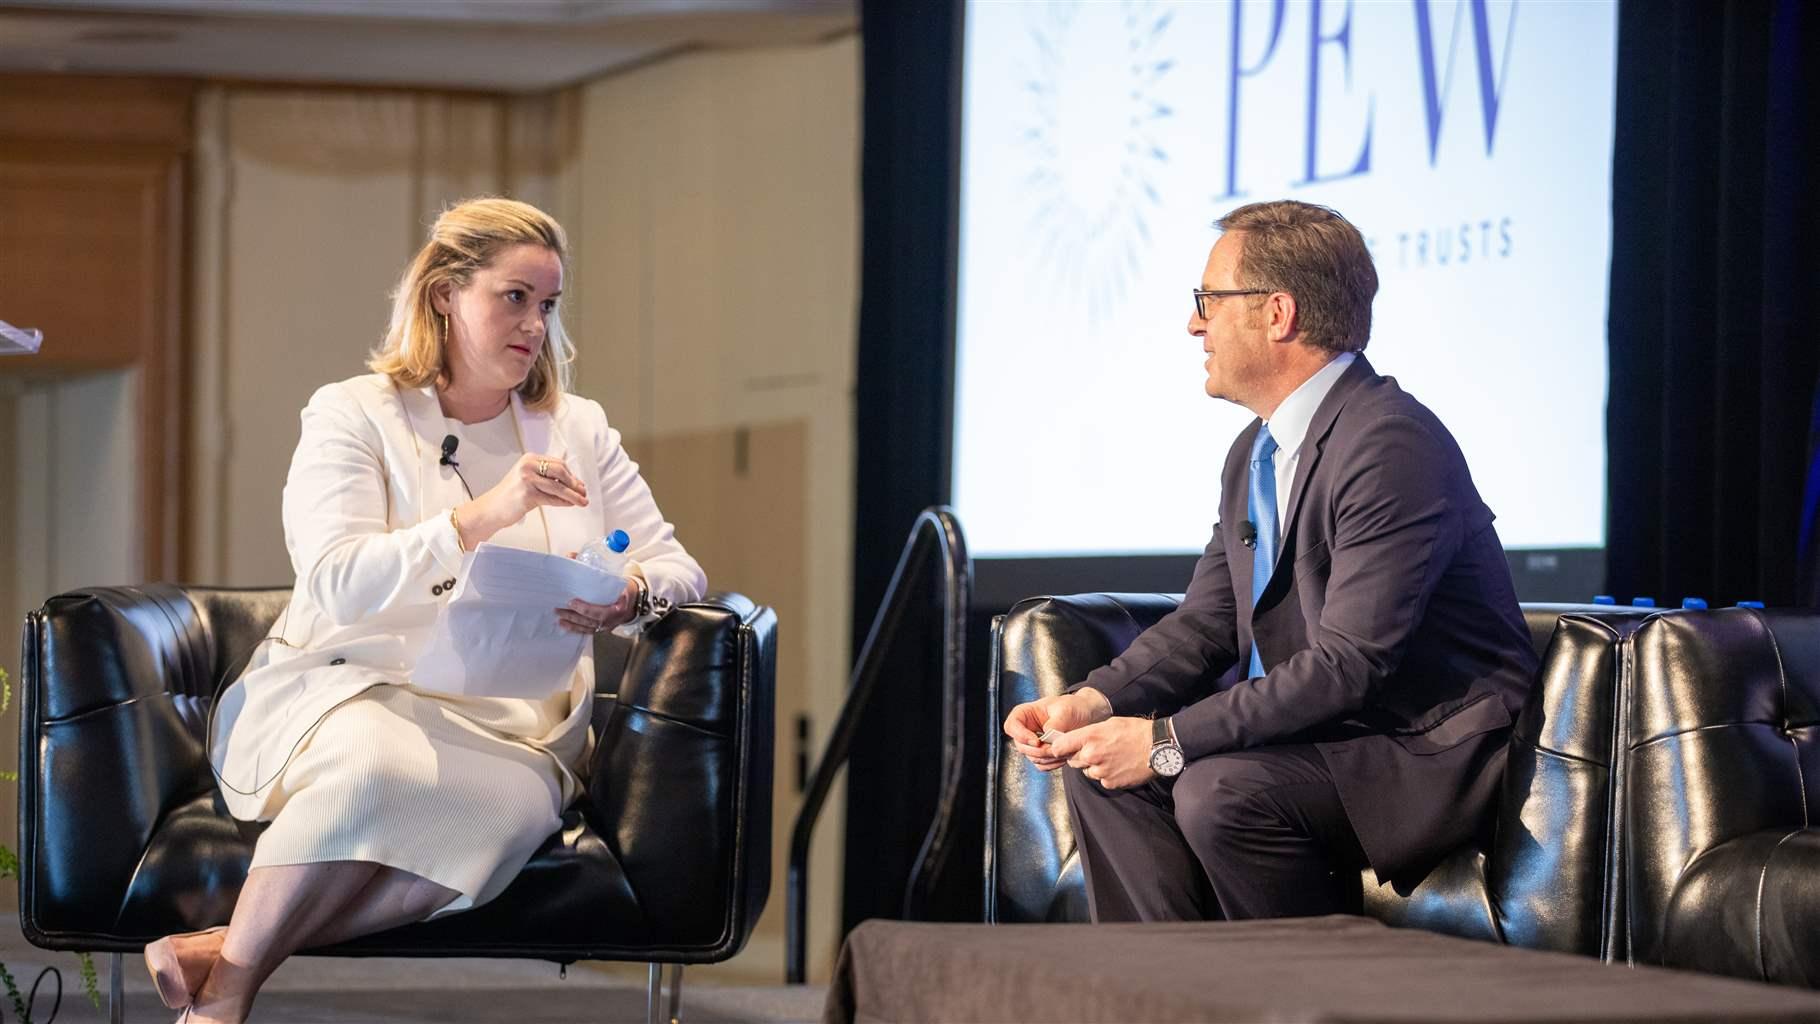 Pew’s Kathryn de Wit and Alan Davidson, assistant secretary for the National Telecommunications and Information Administration (NTIA), discuss how state and federal leaders and the communities they serve can come together to achieve universal access to broadband. 